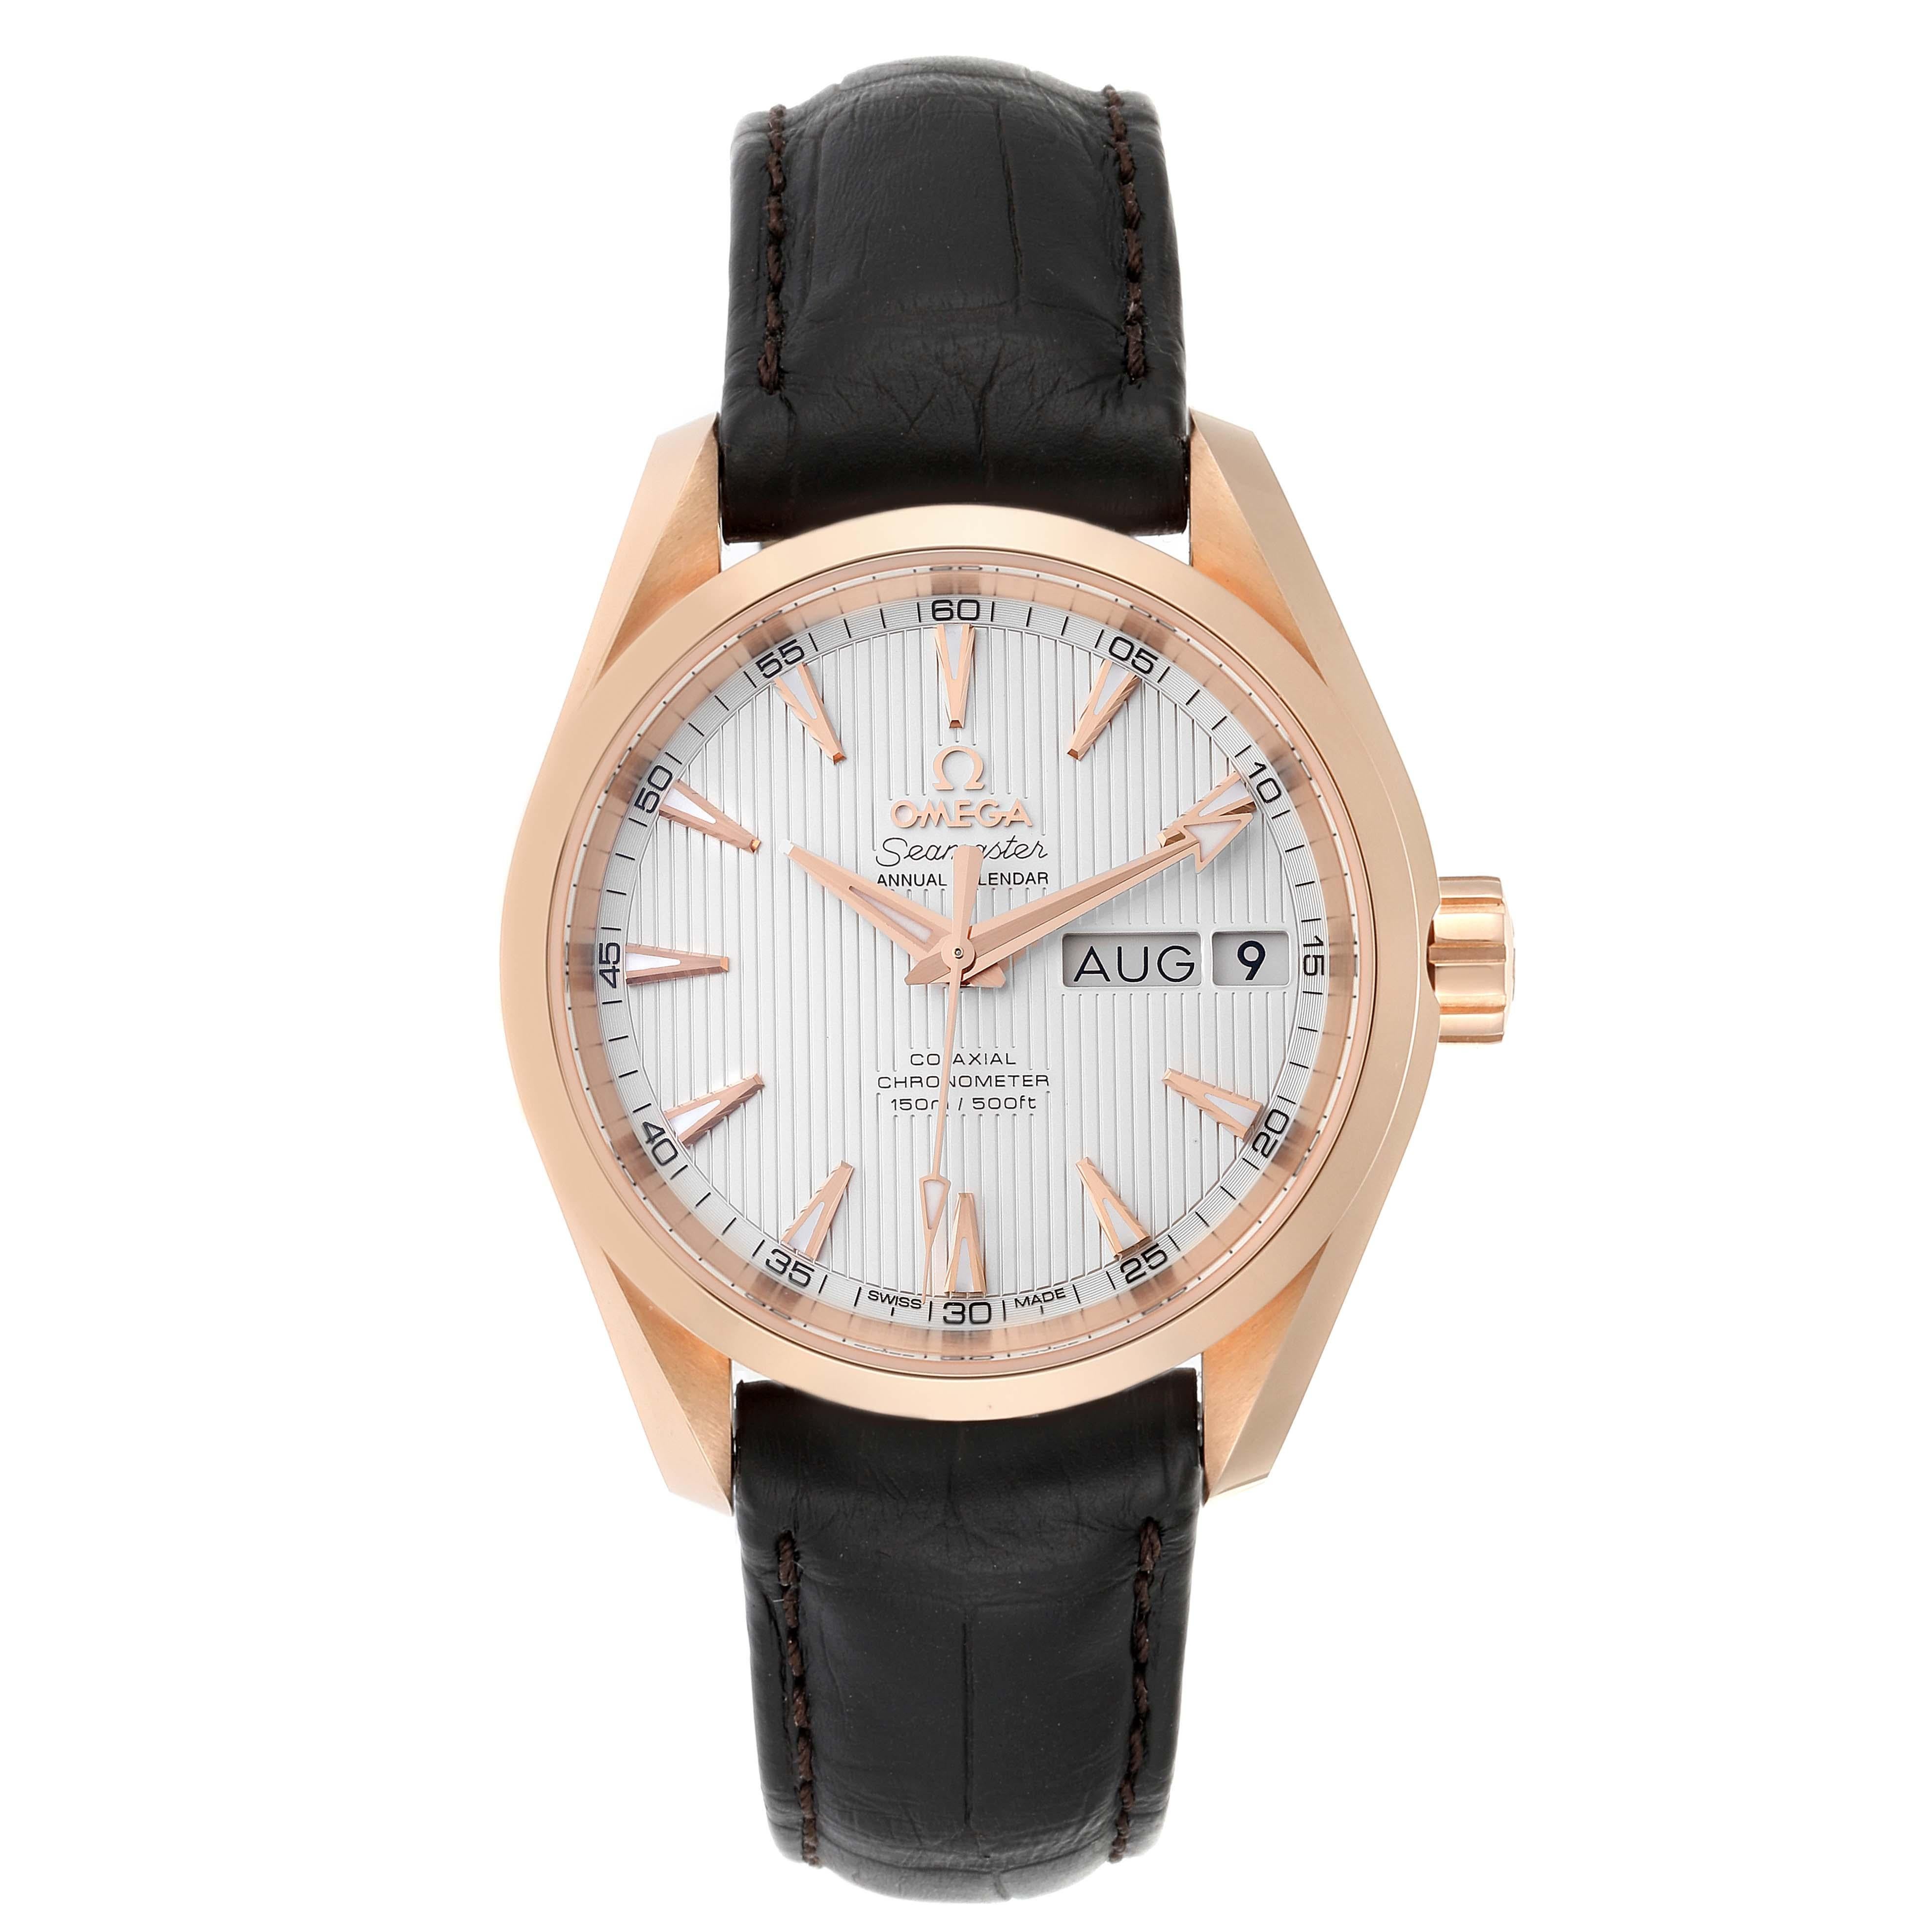 Omega Aqua Terra Annual Calendar Rose Gold Watch 231.53.39.22.02.001 Unworn. Automatic Self-winding movement with Co-Axial escapement. Annual calendar with instantaneous jump. Silicon balance-spring on free sprung-balance, 2 barrels mounted in